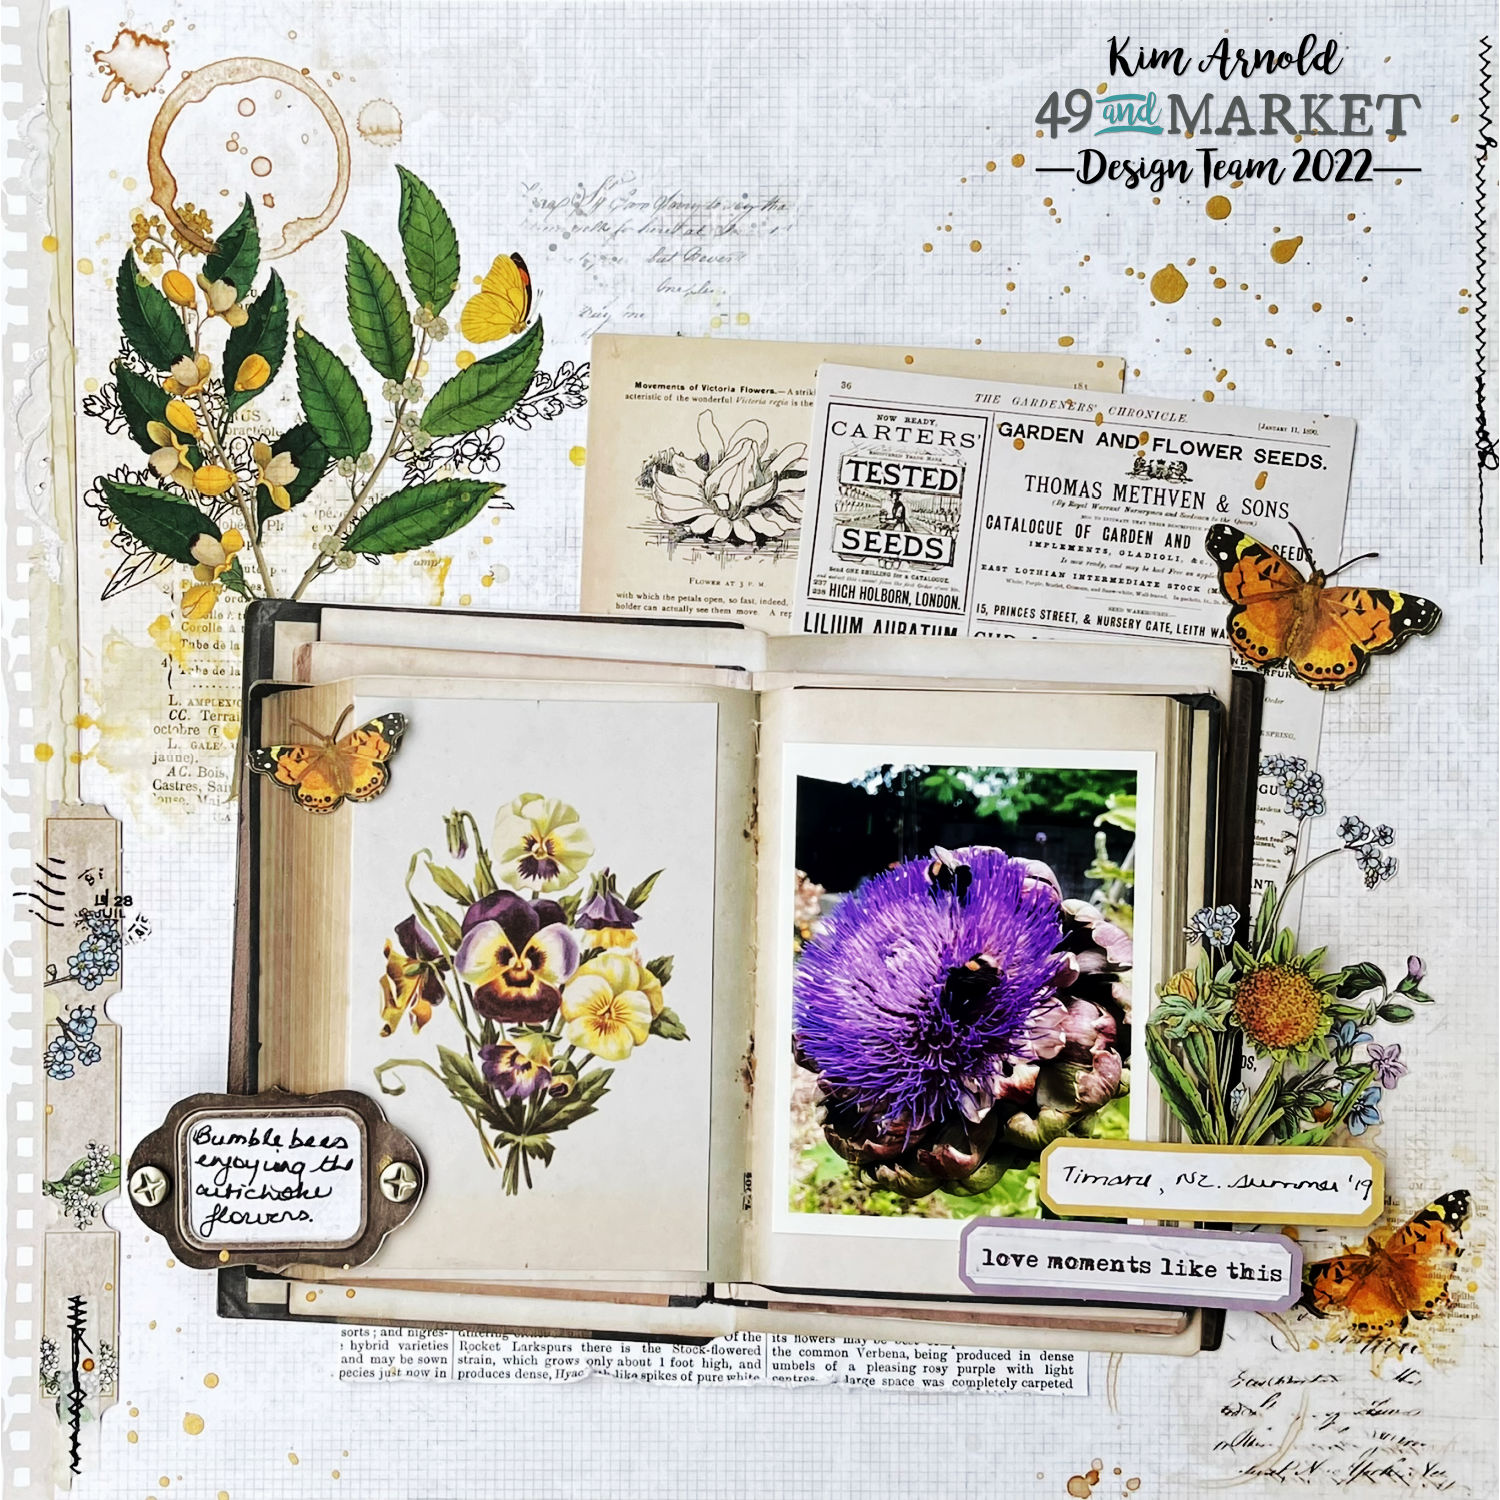 Love moments - Layout by Kim Arnold